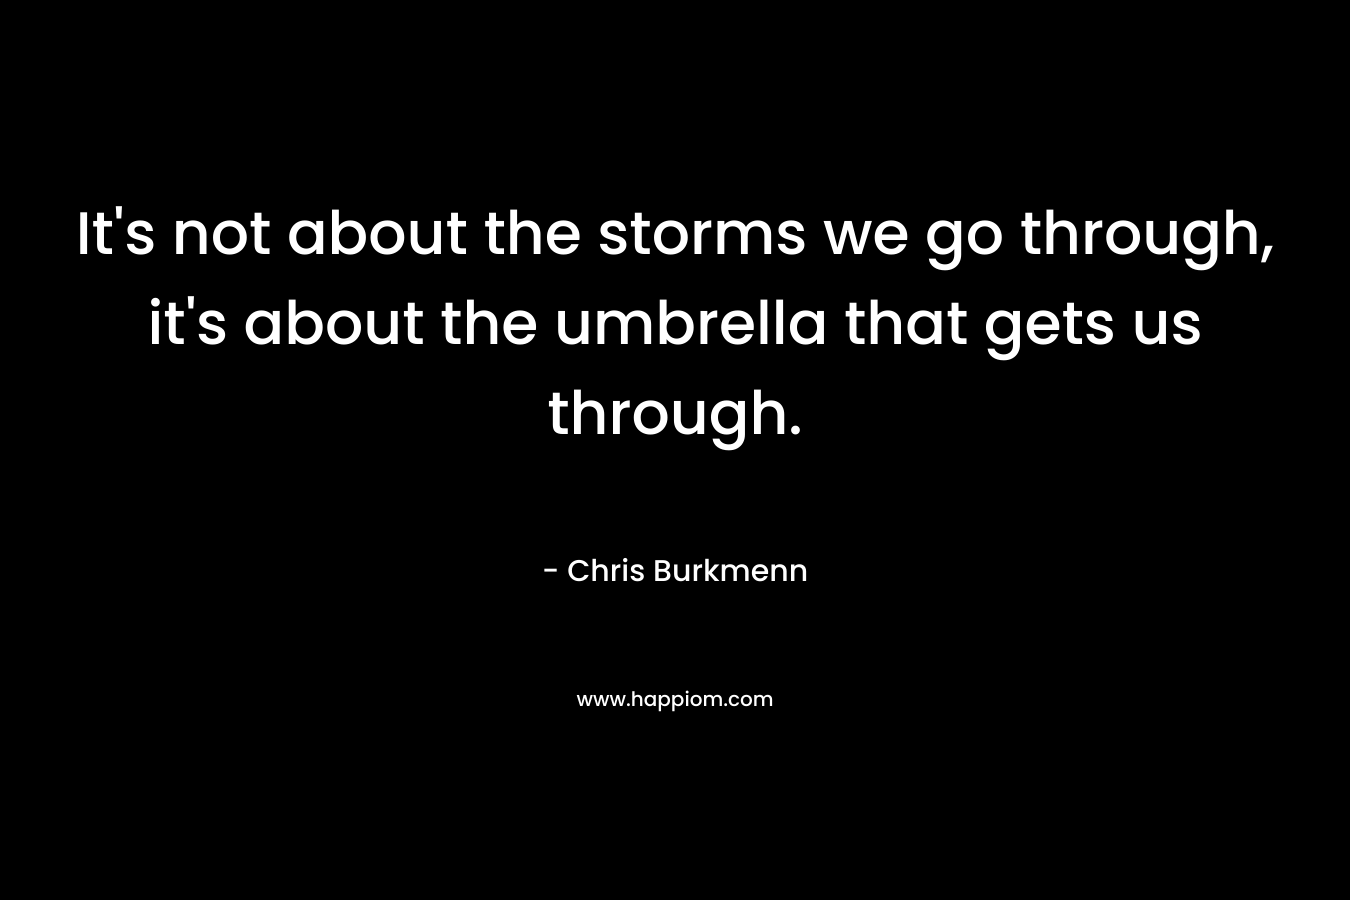 It's not about the storms we go through, it's about the umbrella that gets us through.